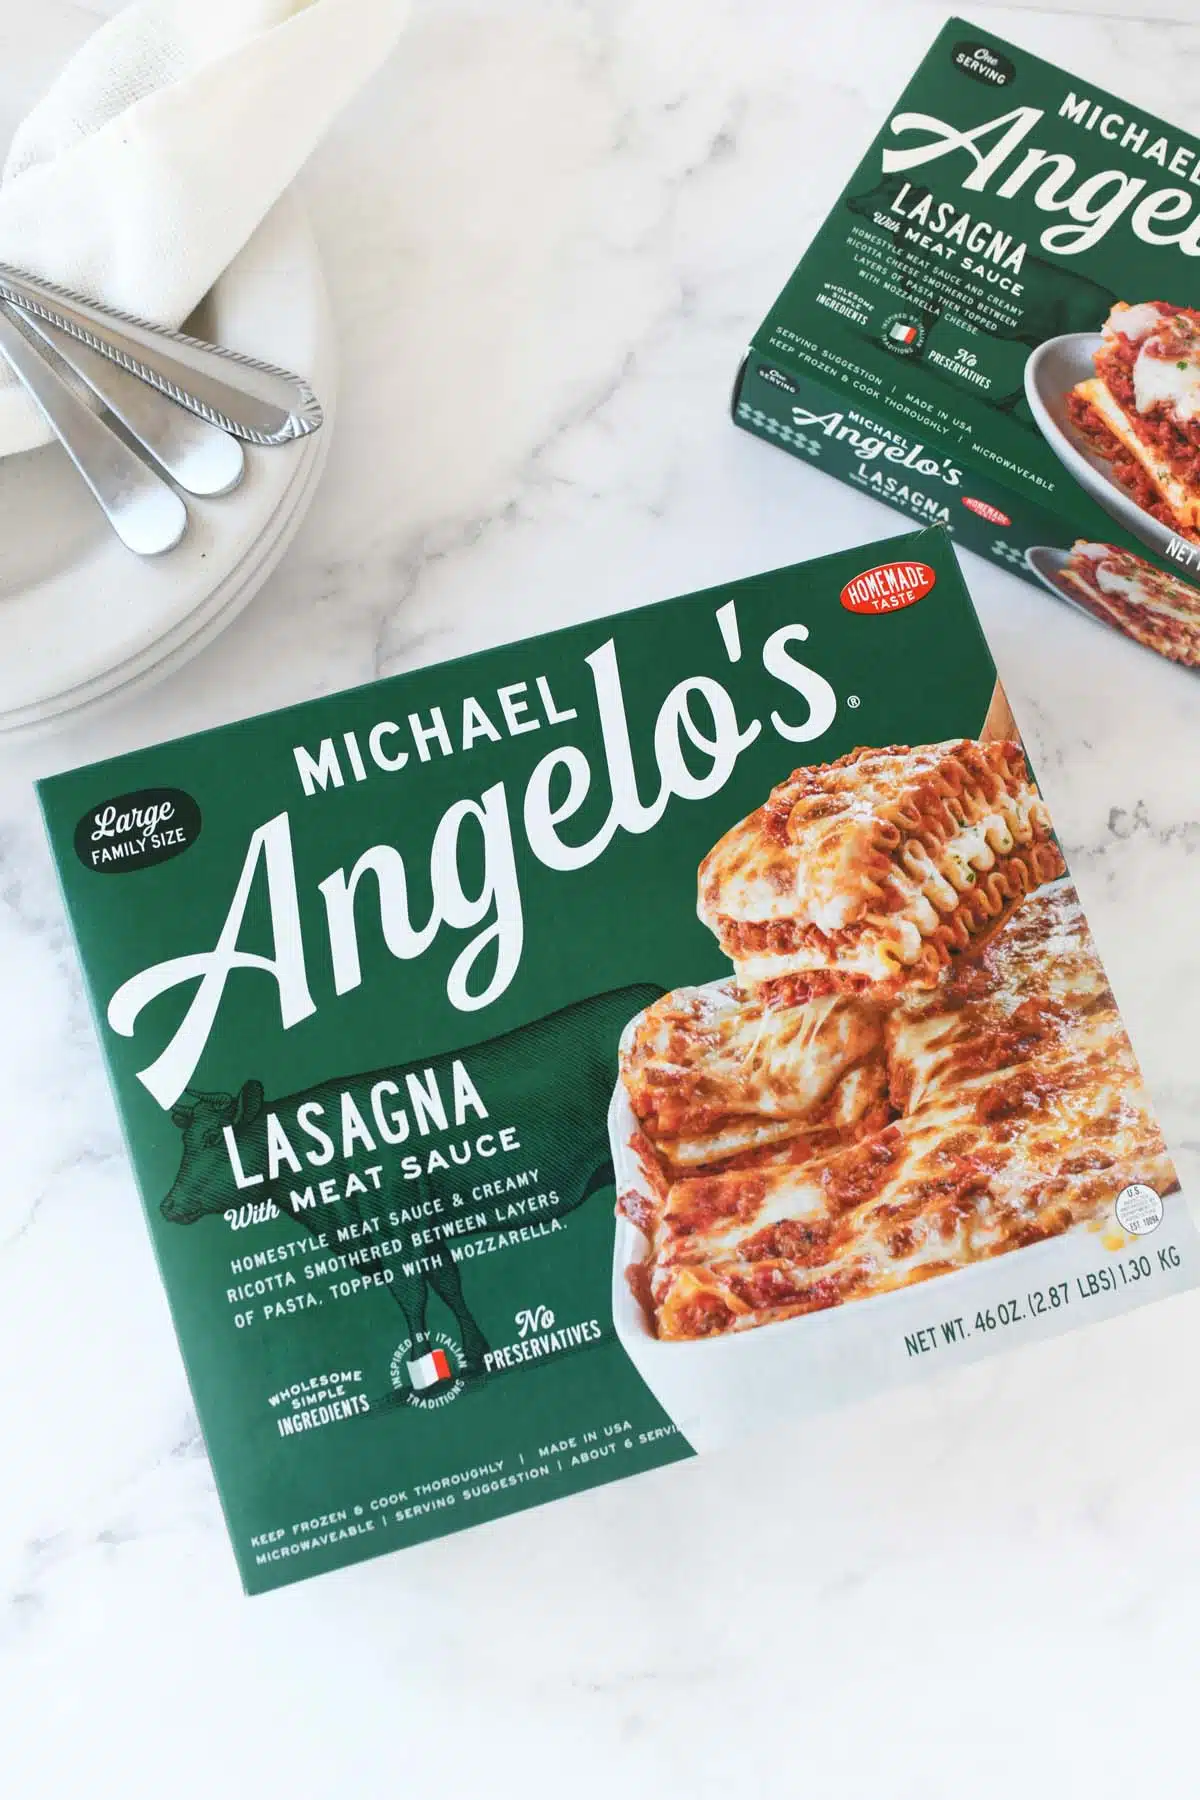 Michael Angelo's Large Family Size product box on a white marble table with plates and cutlery.